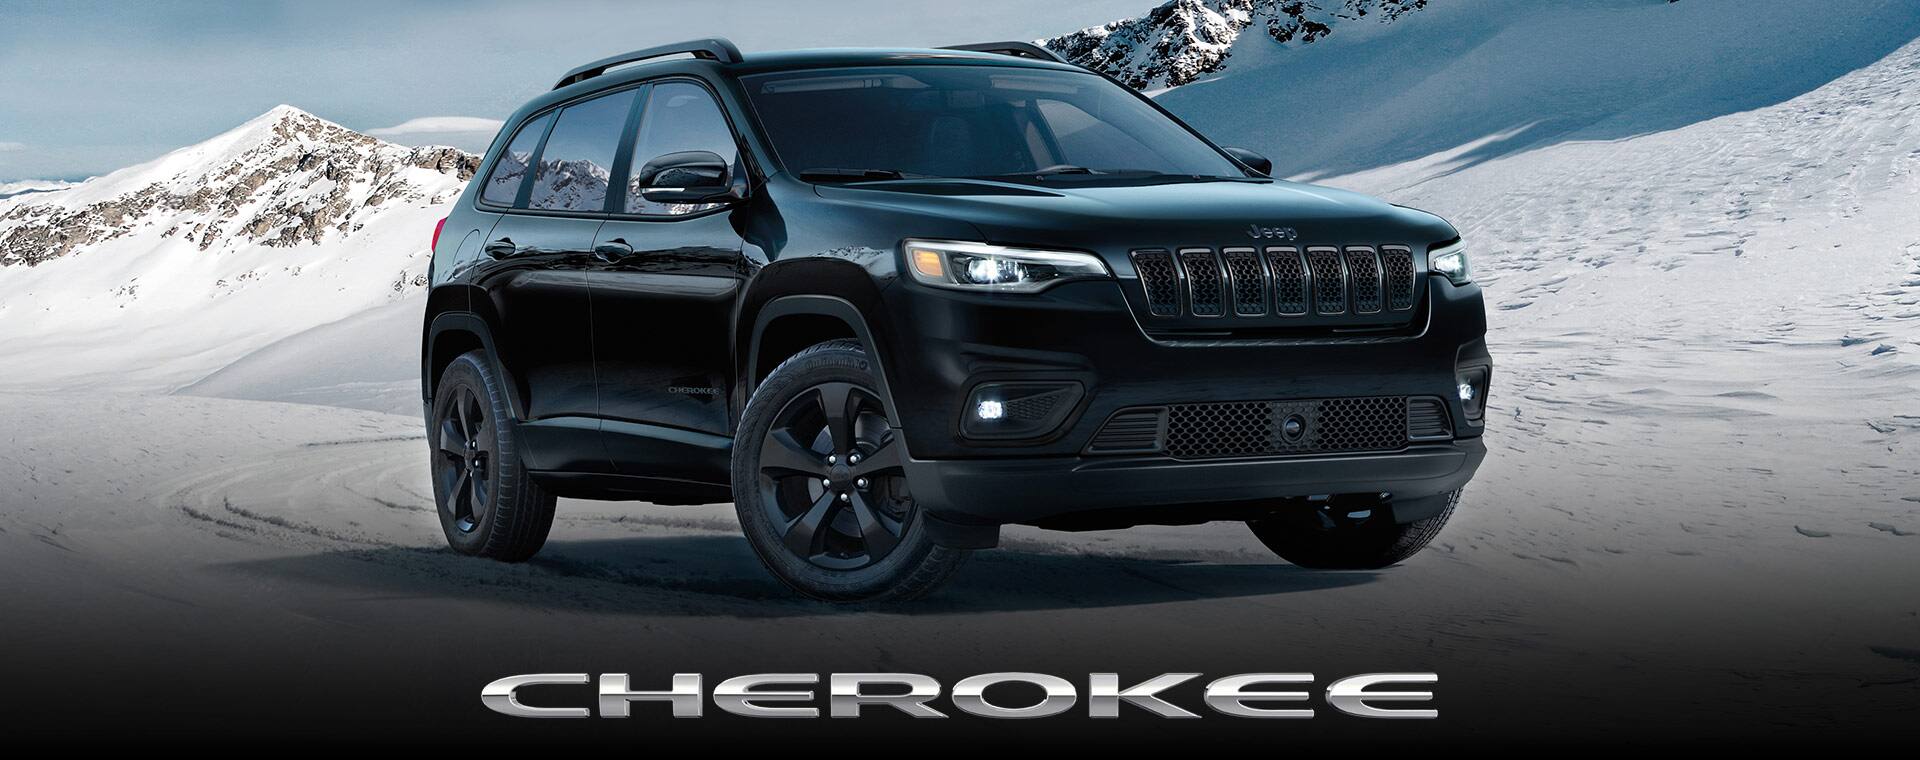 A 2023 Jeep Cherokee Altitude LUX parked on a snow-covered surface with mountains in the background.